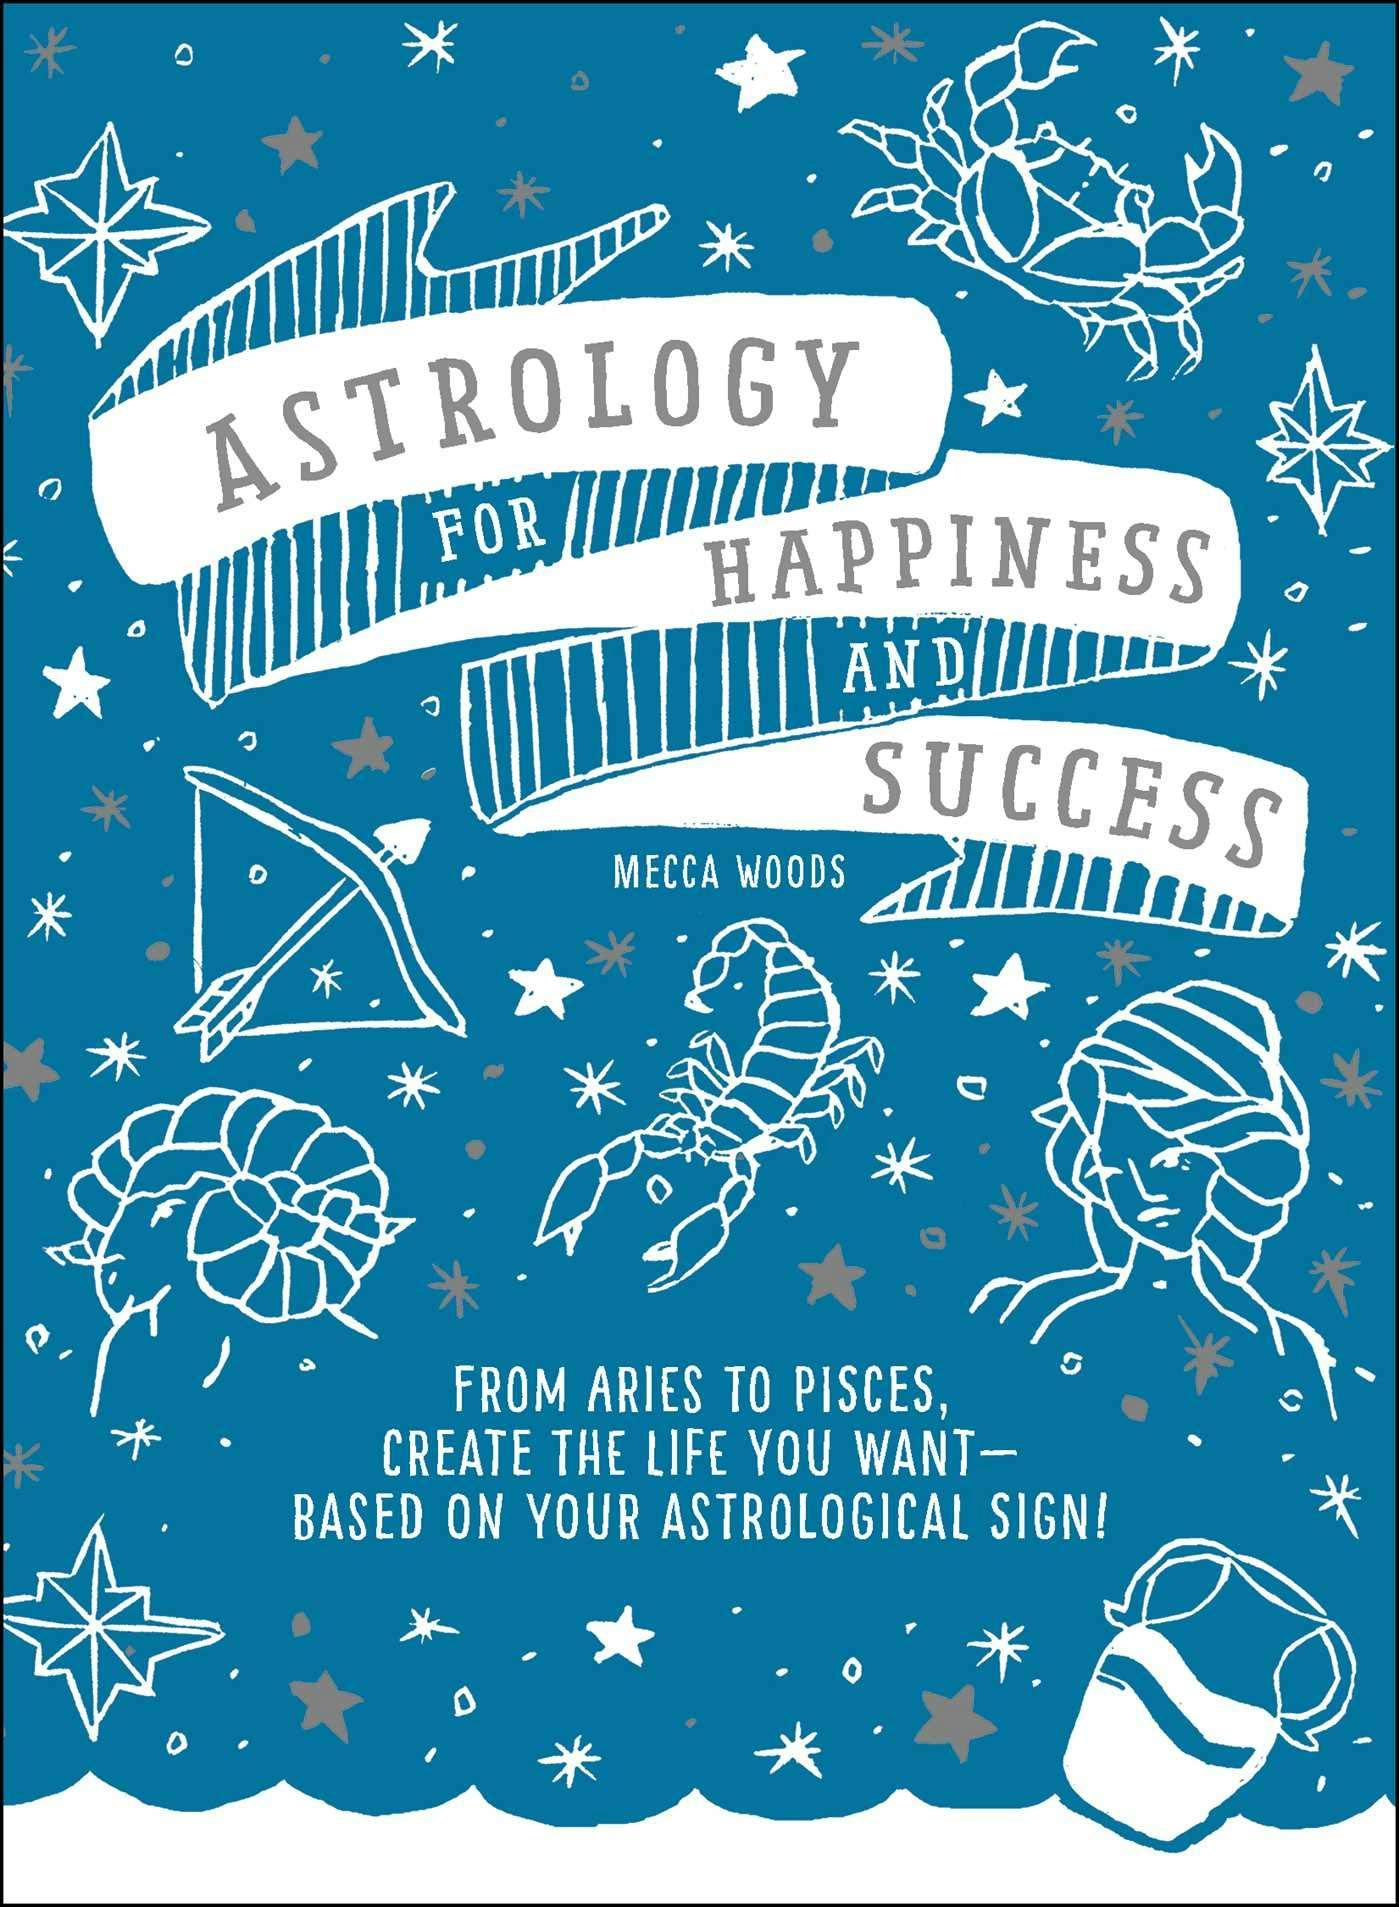 Cover of Mecca Woods' astrology book 'astrology for happiness and success.' It's a blue cover with white illustrations relating to the zodiac.